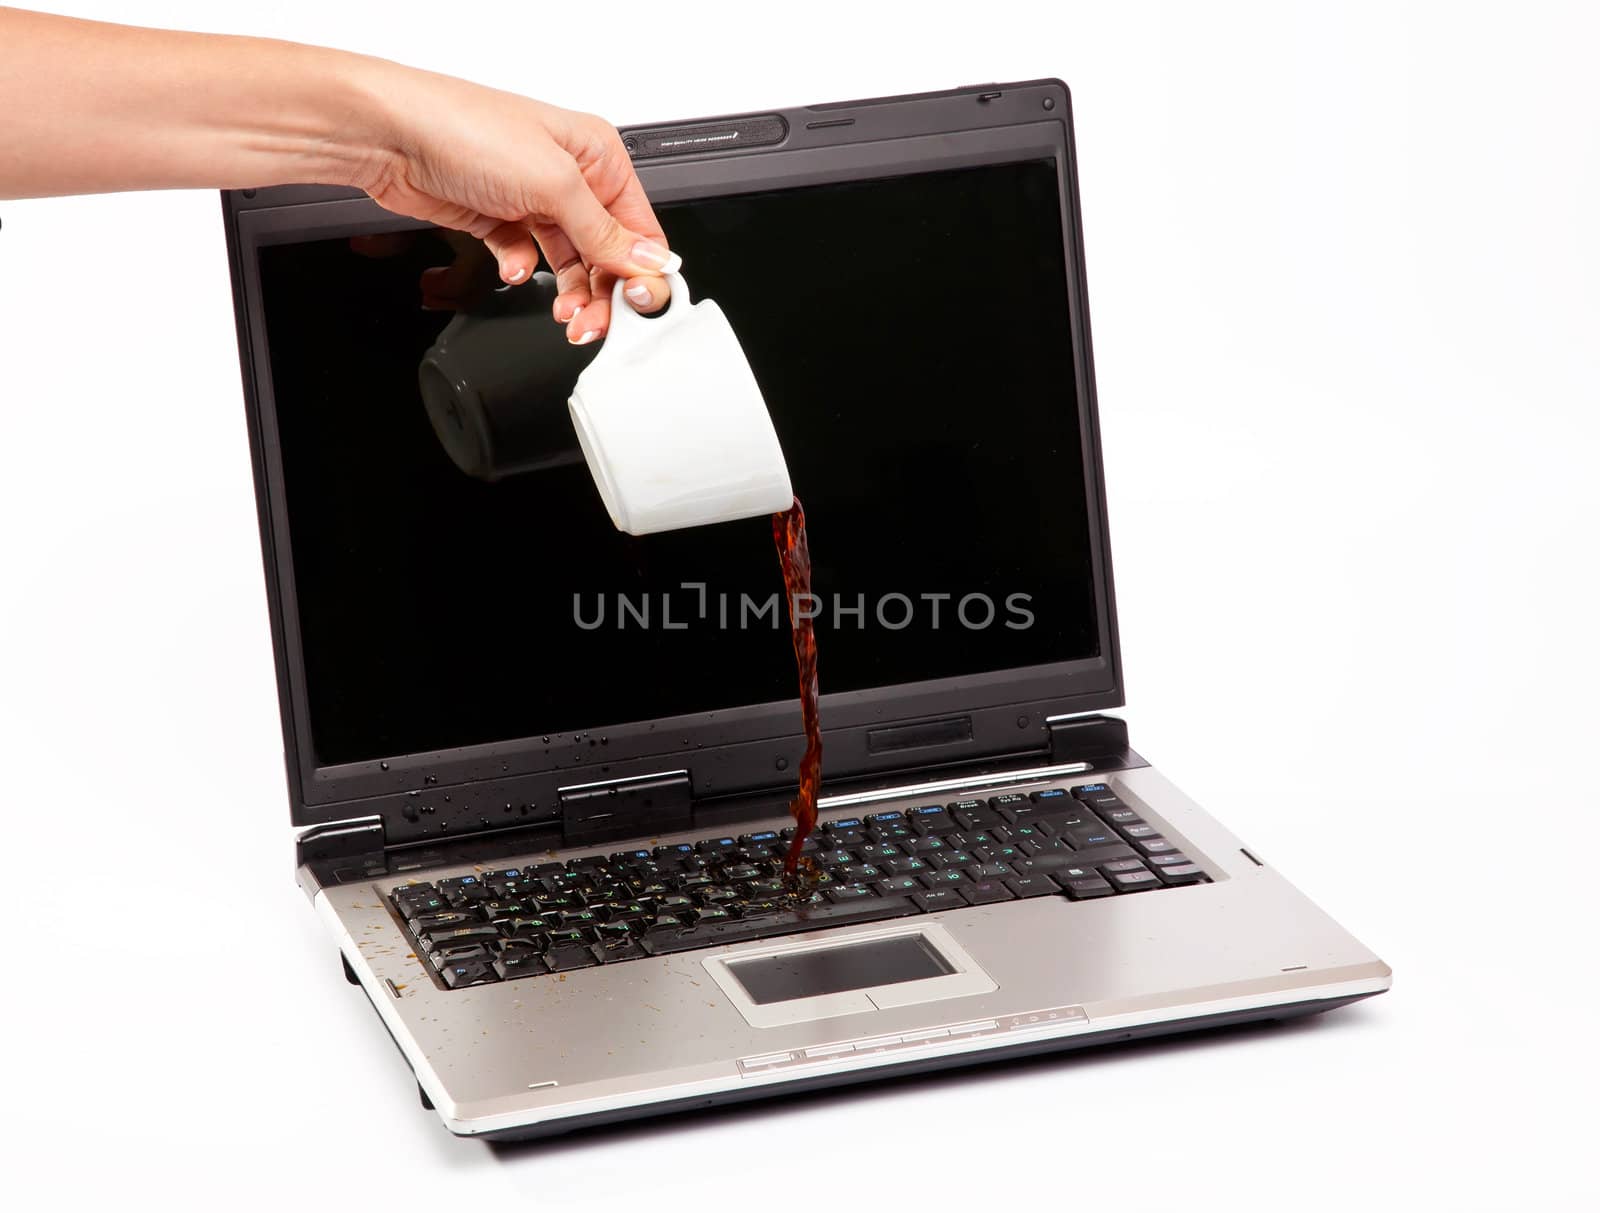 Coffee spilled on laptop keyboard on white background